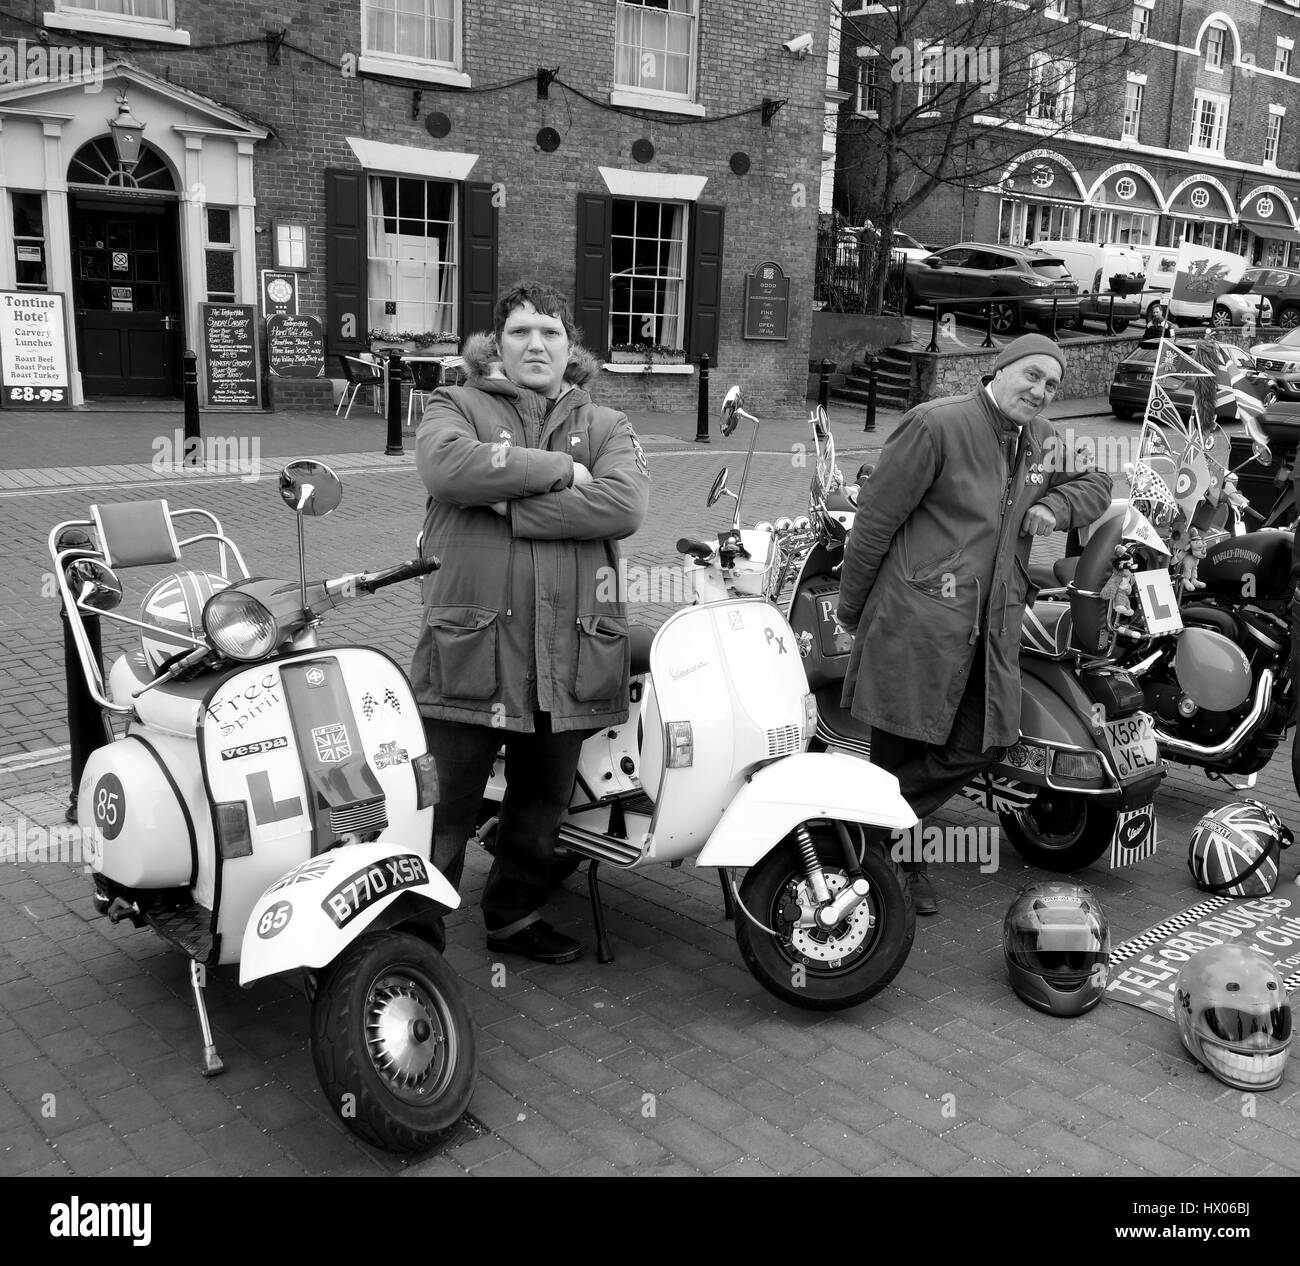 Motor scooter enthusiasts dressed in mod style 'parker coats' posing with their Vespa scooters. Stock Photo